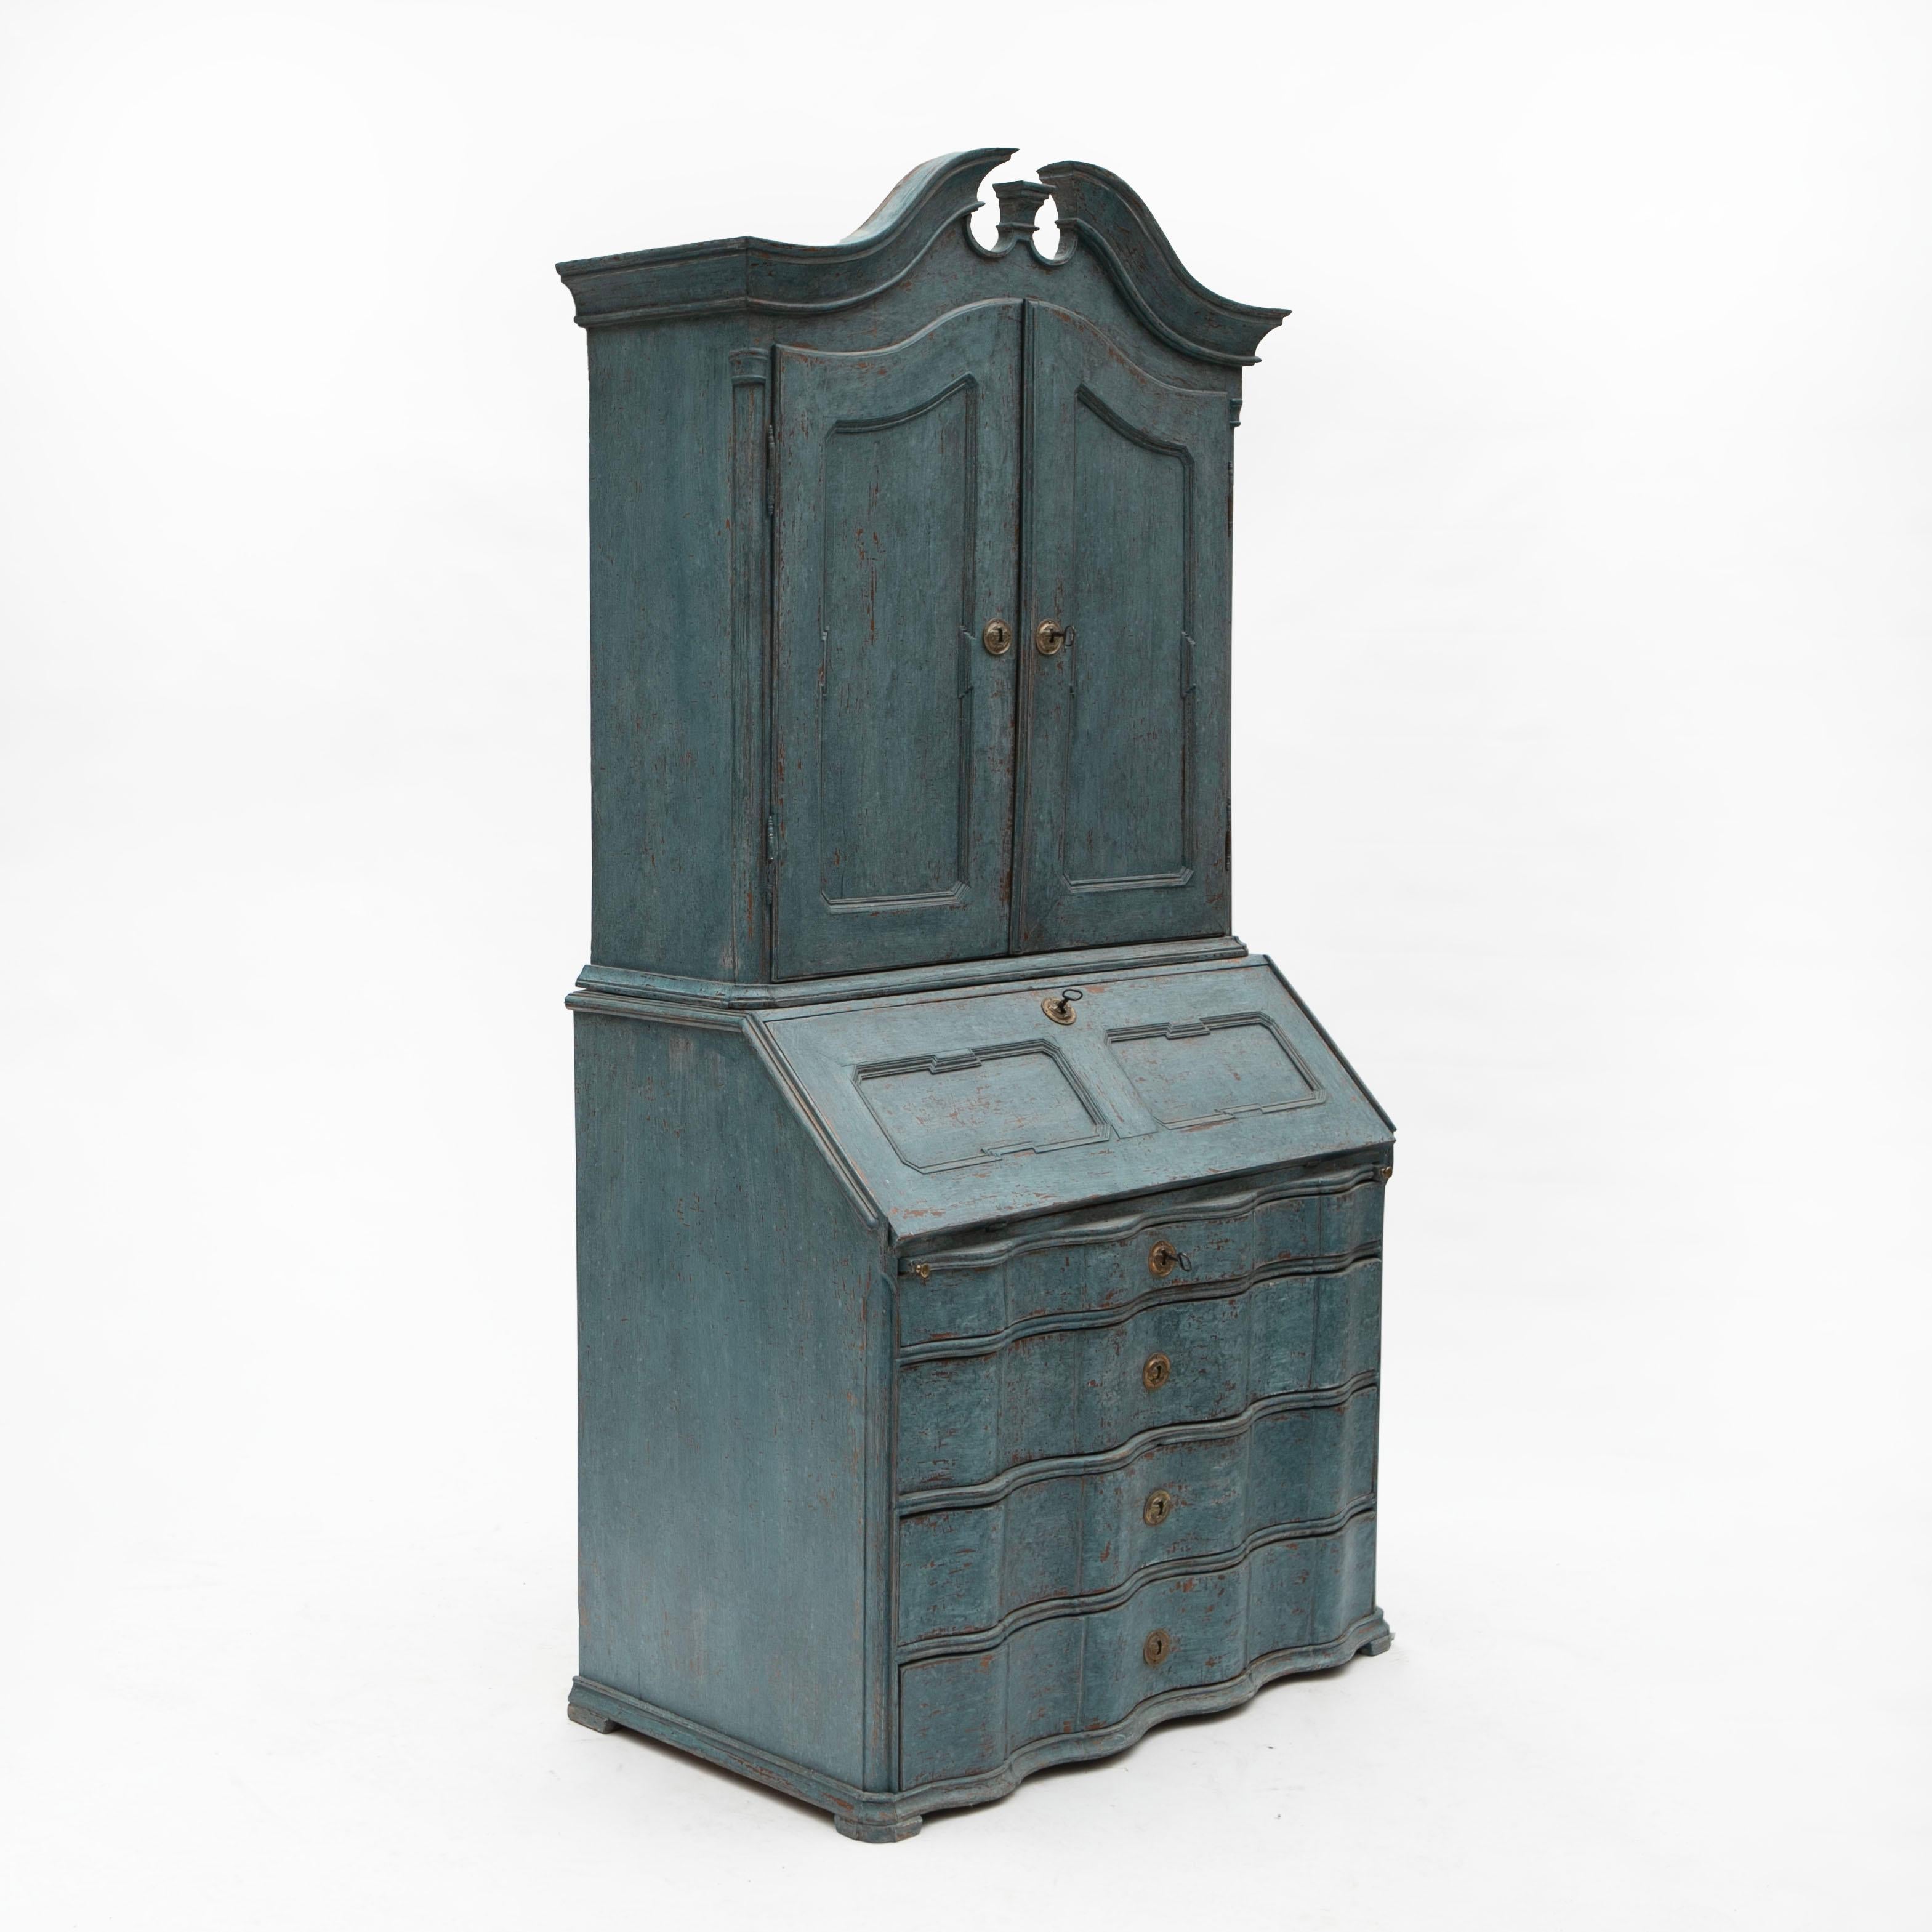 18th Century Danish Baroque period secretary cabinet in two parts. Crafted in oak, painted in a beautiful blue color and a dark grey interior.

Upper cabinet with curved crown and a decorative carved swan neck pediment over double doors the follows